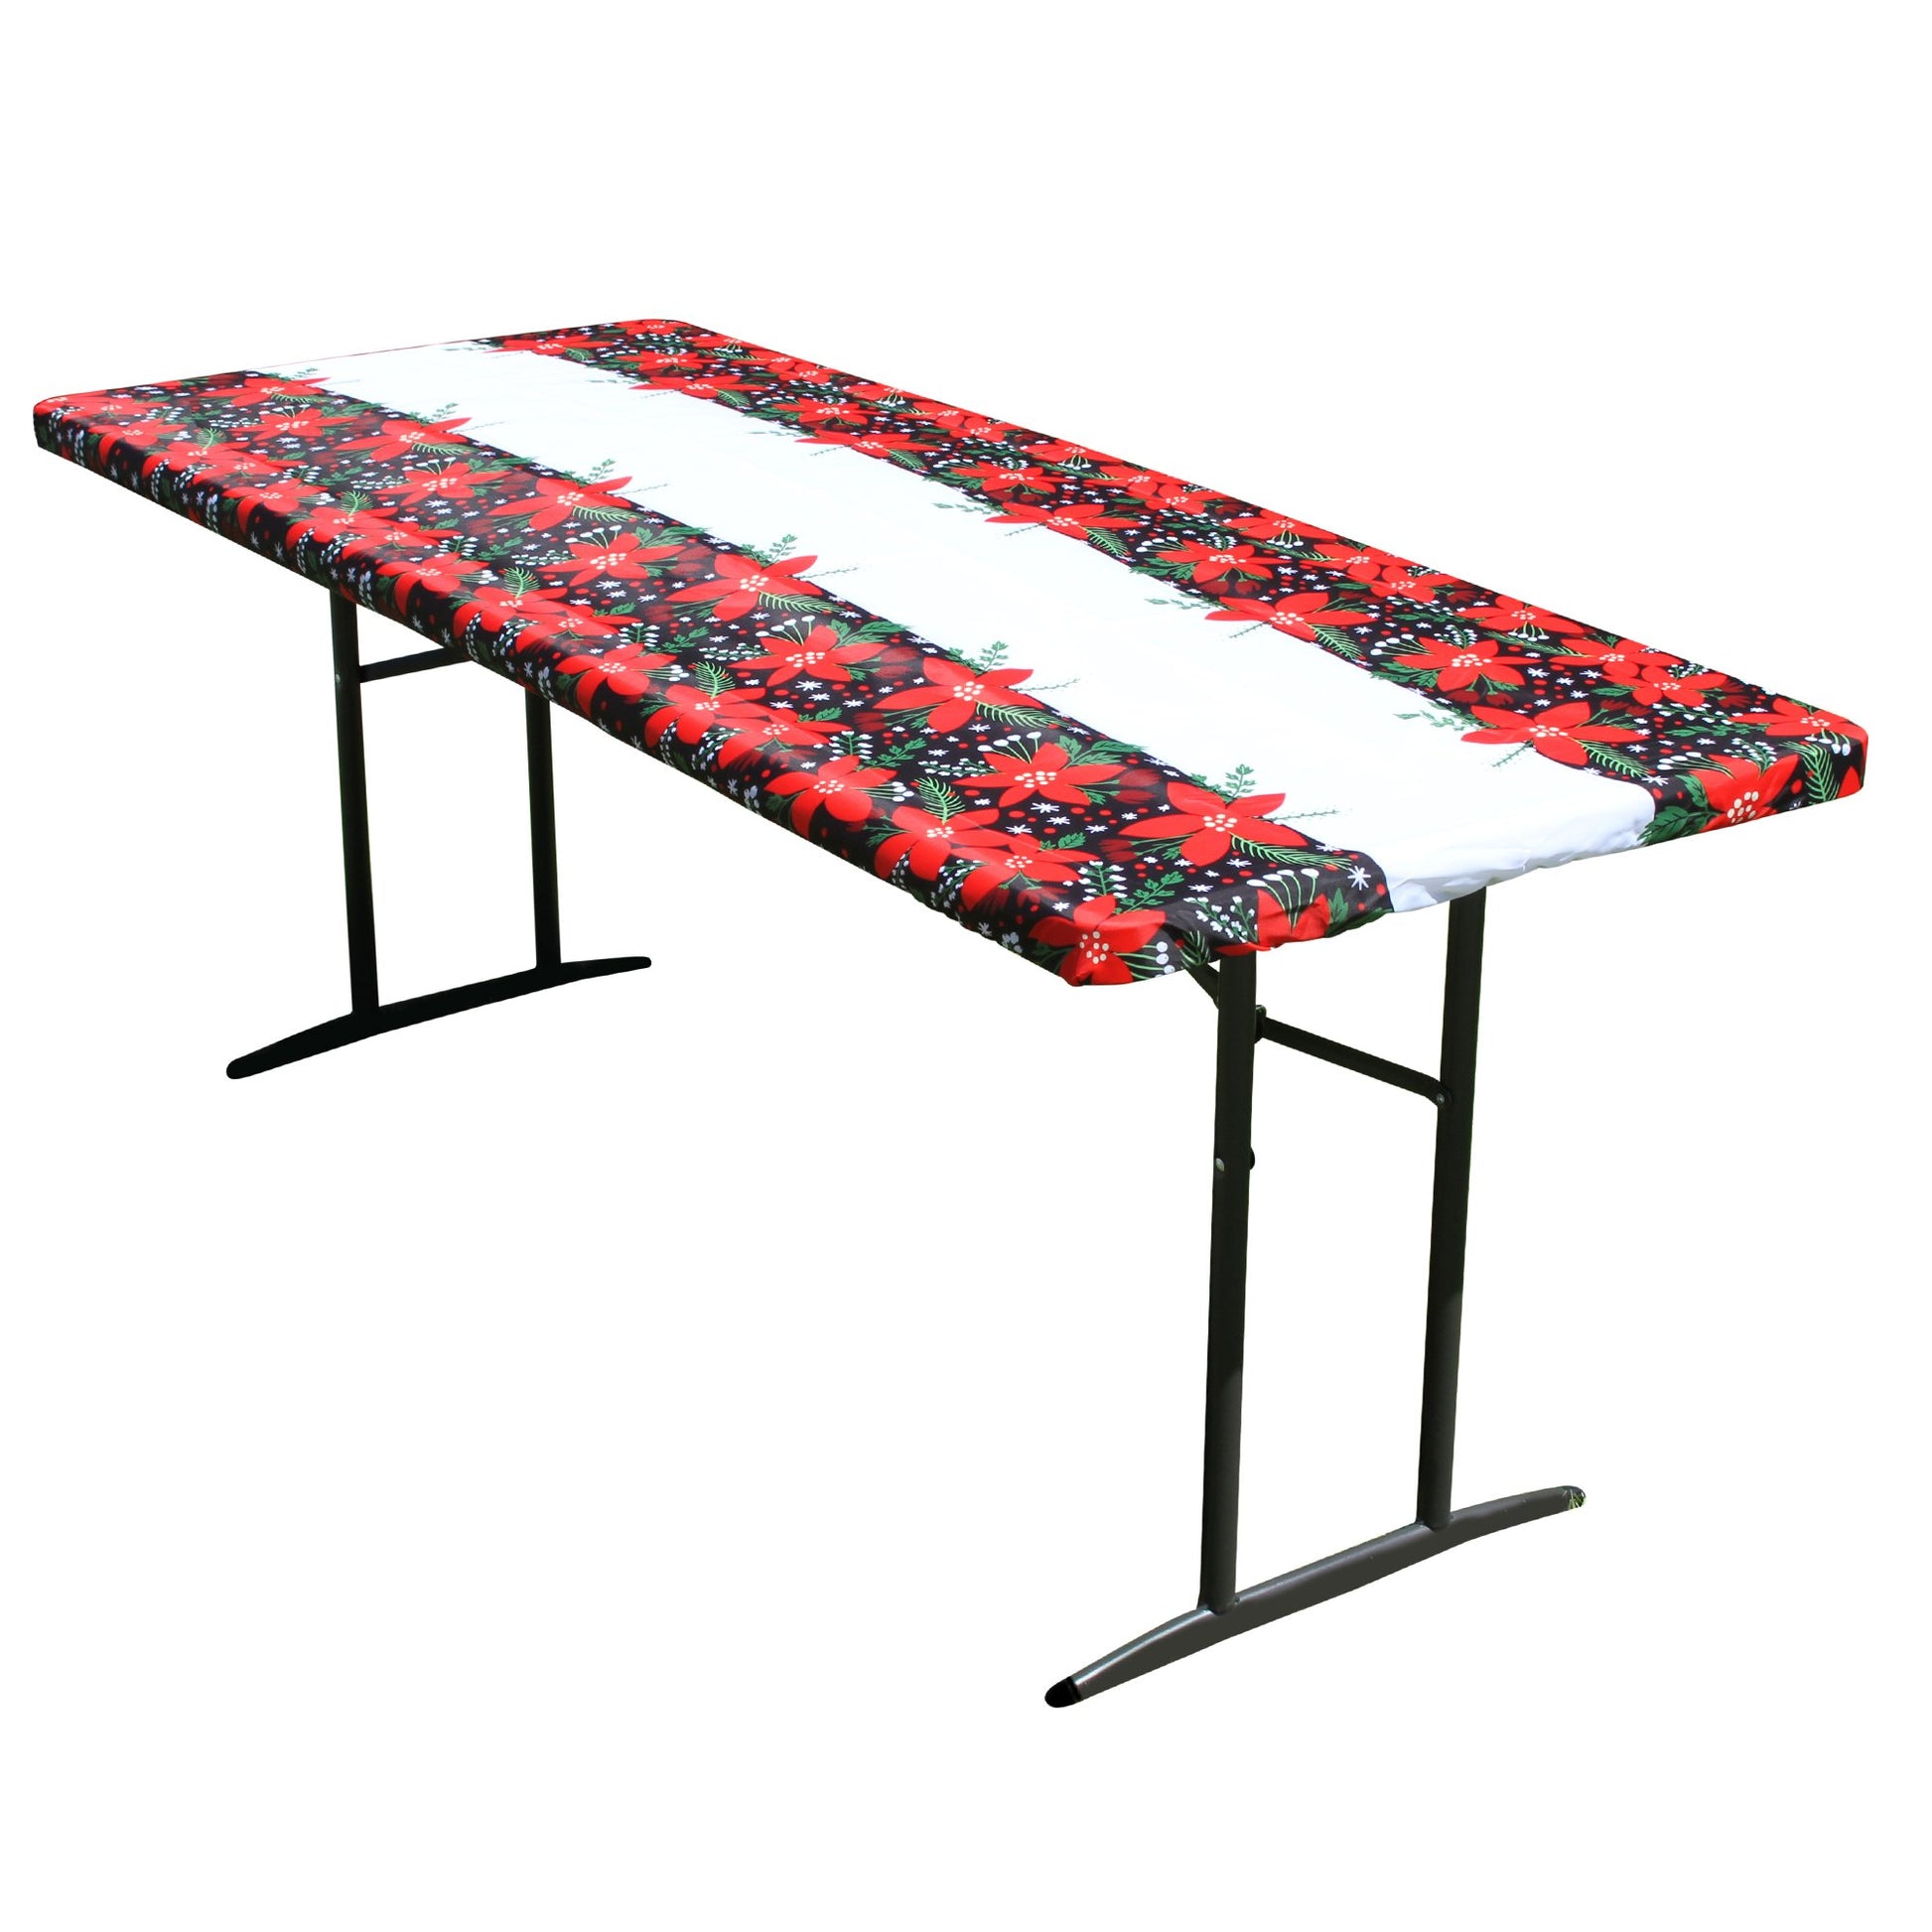 TableCloth PLUS 72" Winter Fitted Polyester Tablecloth for 6' Folding Tables displayed adorning a folding table